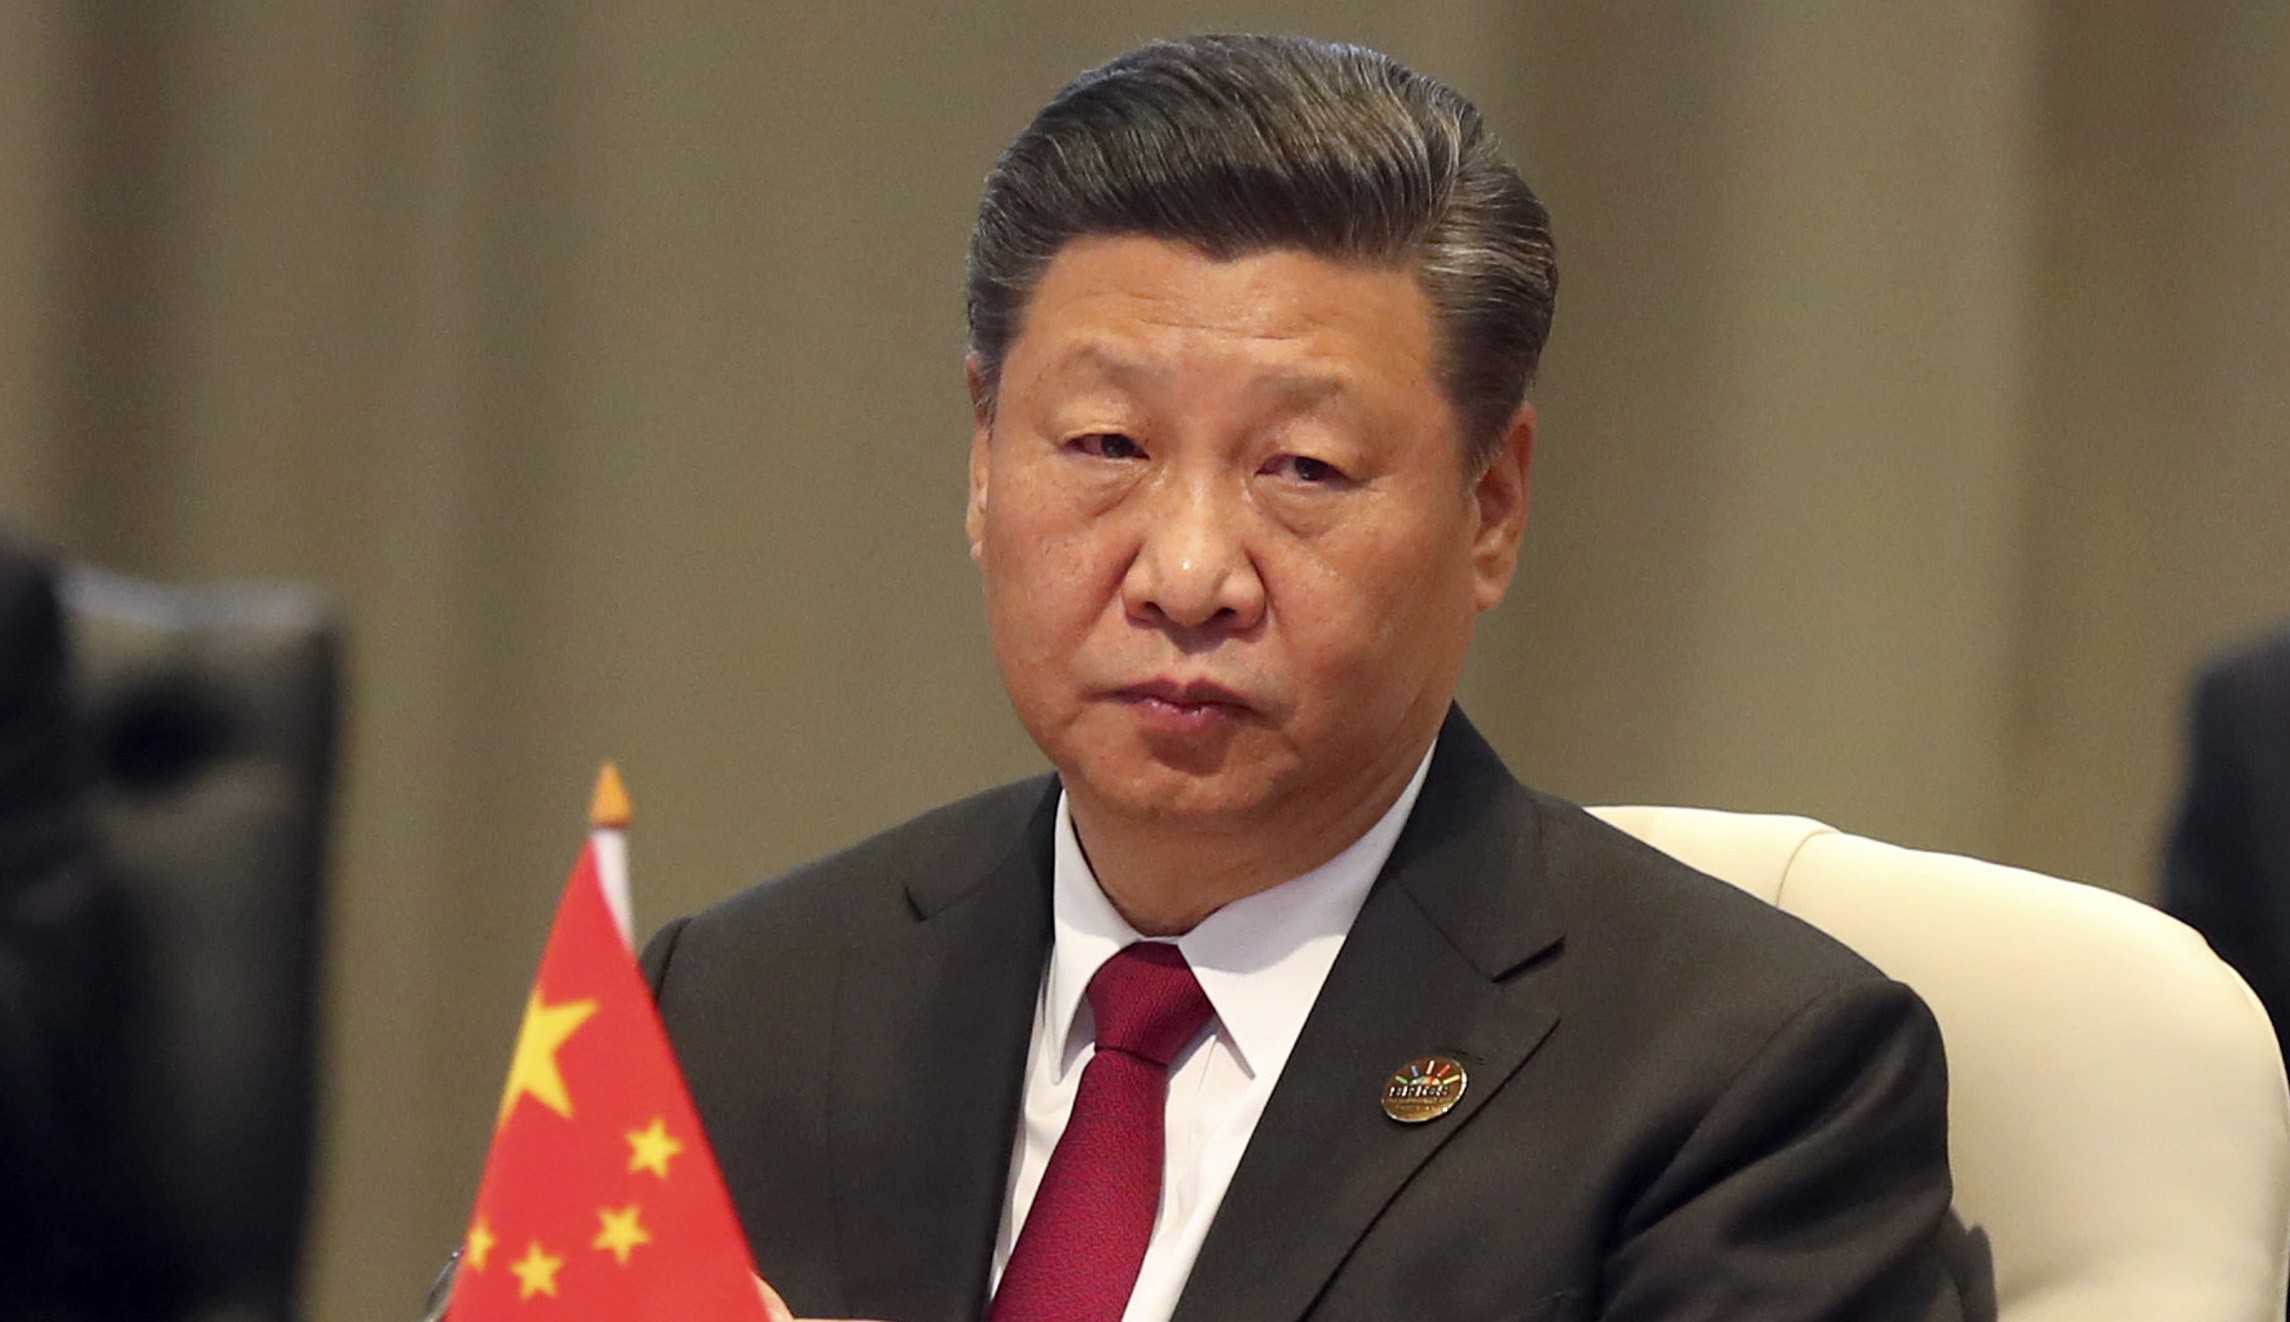 China’s abuse of the Uyghurs unveils the immorality of Xi’s global strategy